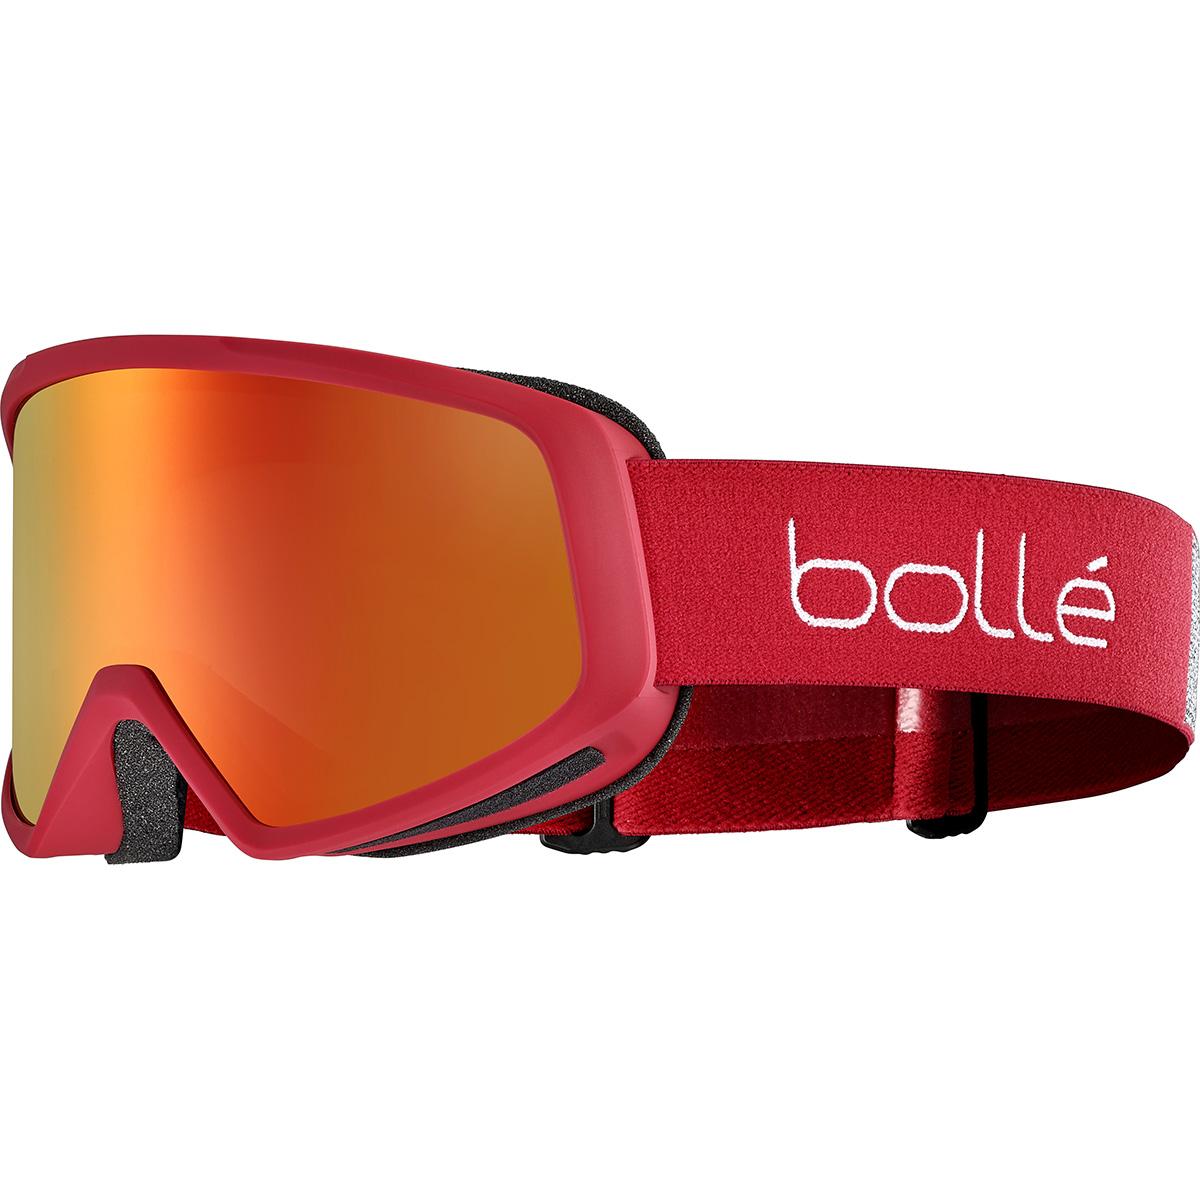 Bolle Bedrock Plus Goggles